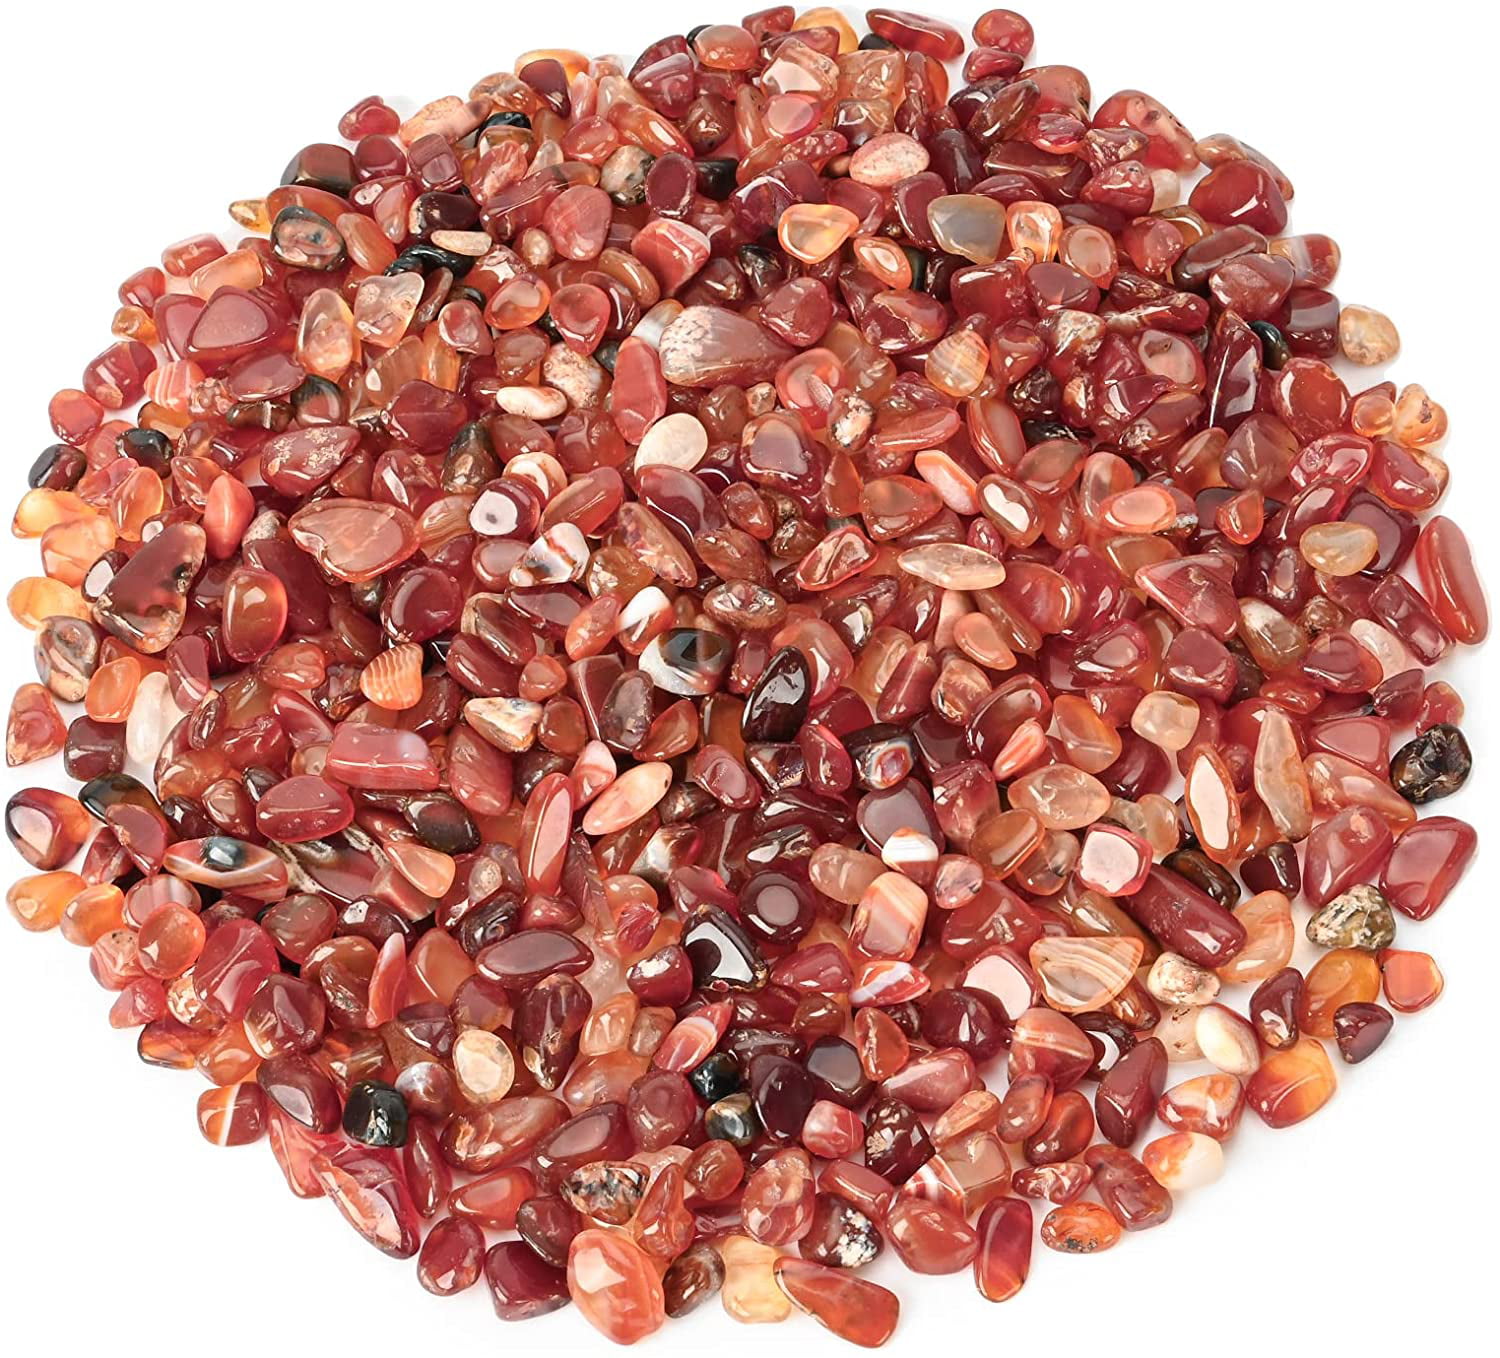 With Aquarium  Gravel 15 lbs Natural Ruby Red Stones Mix 